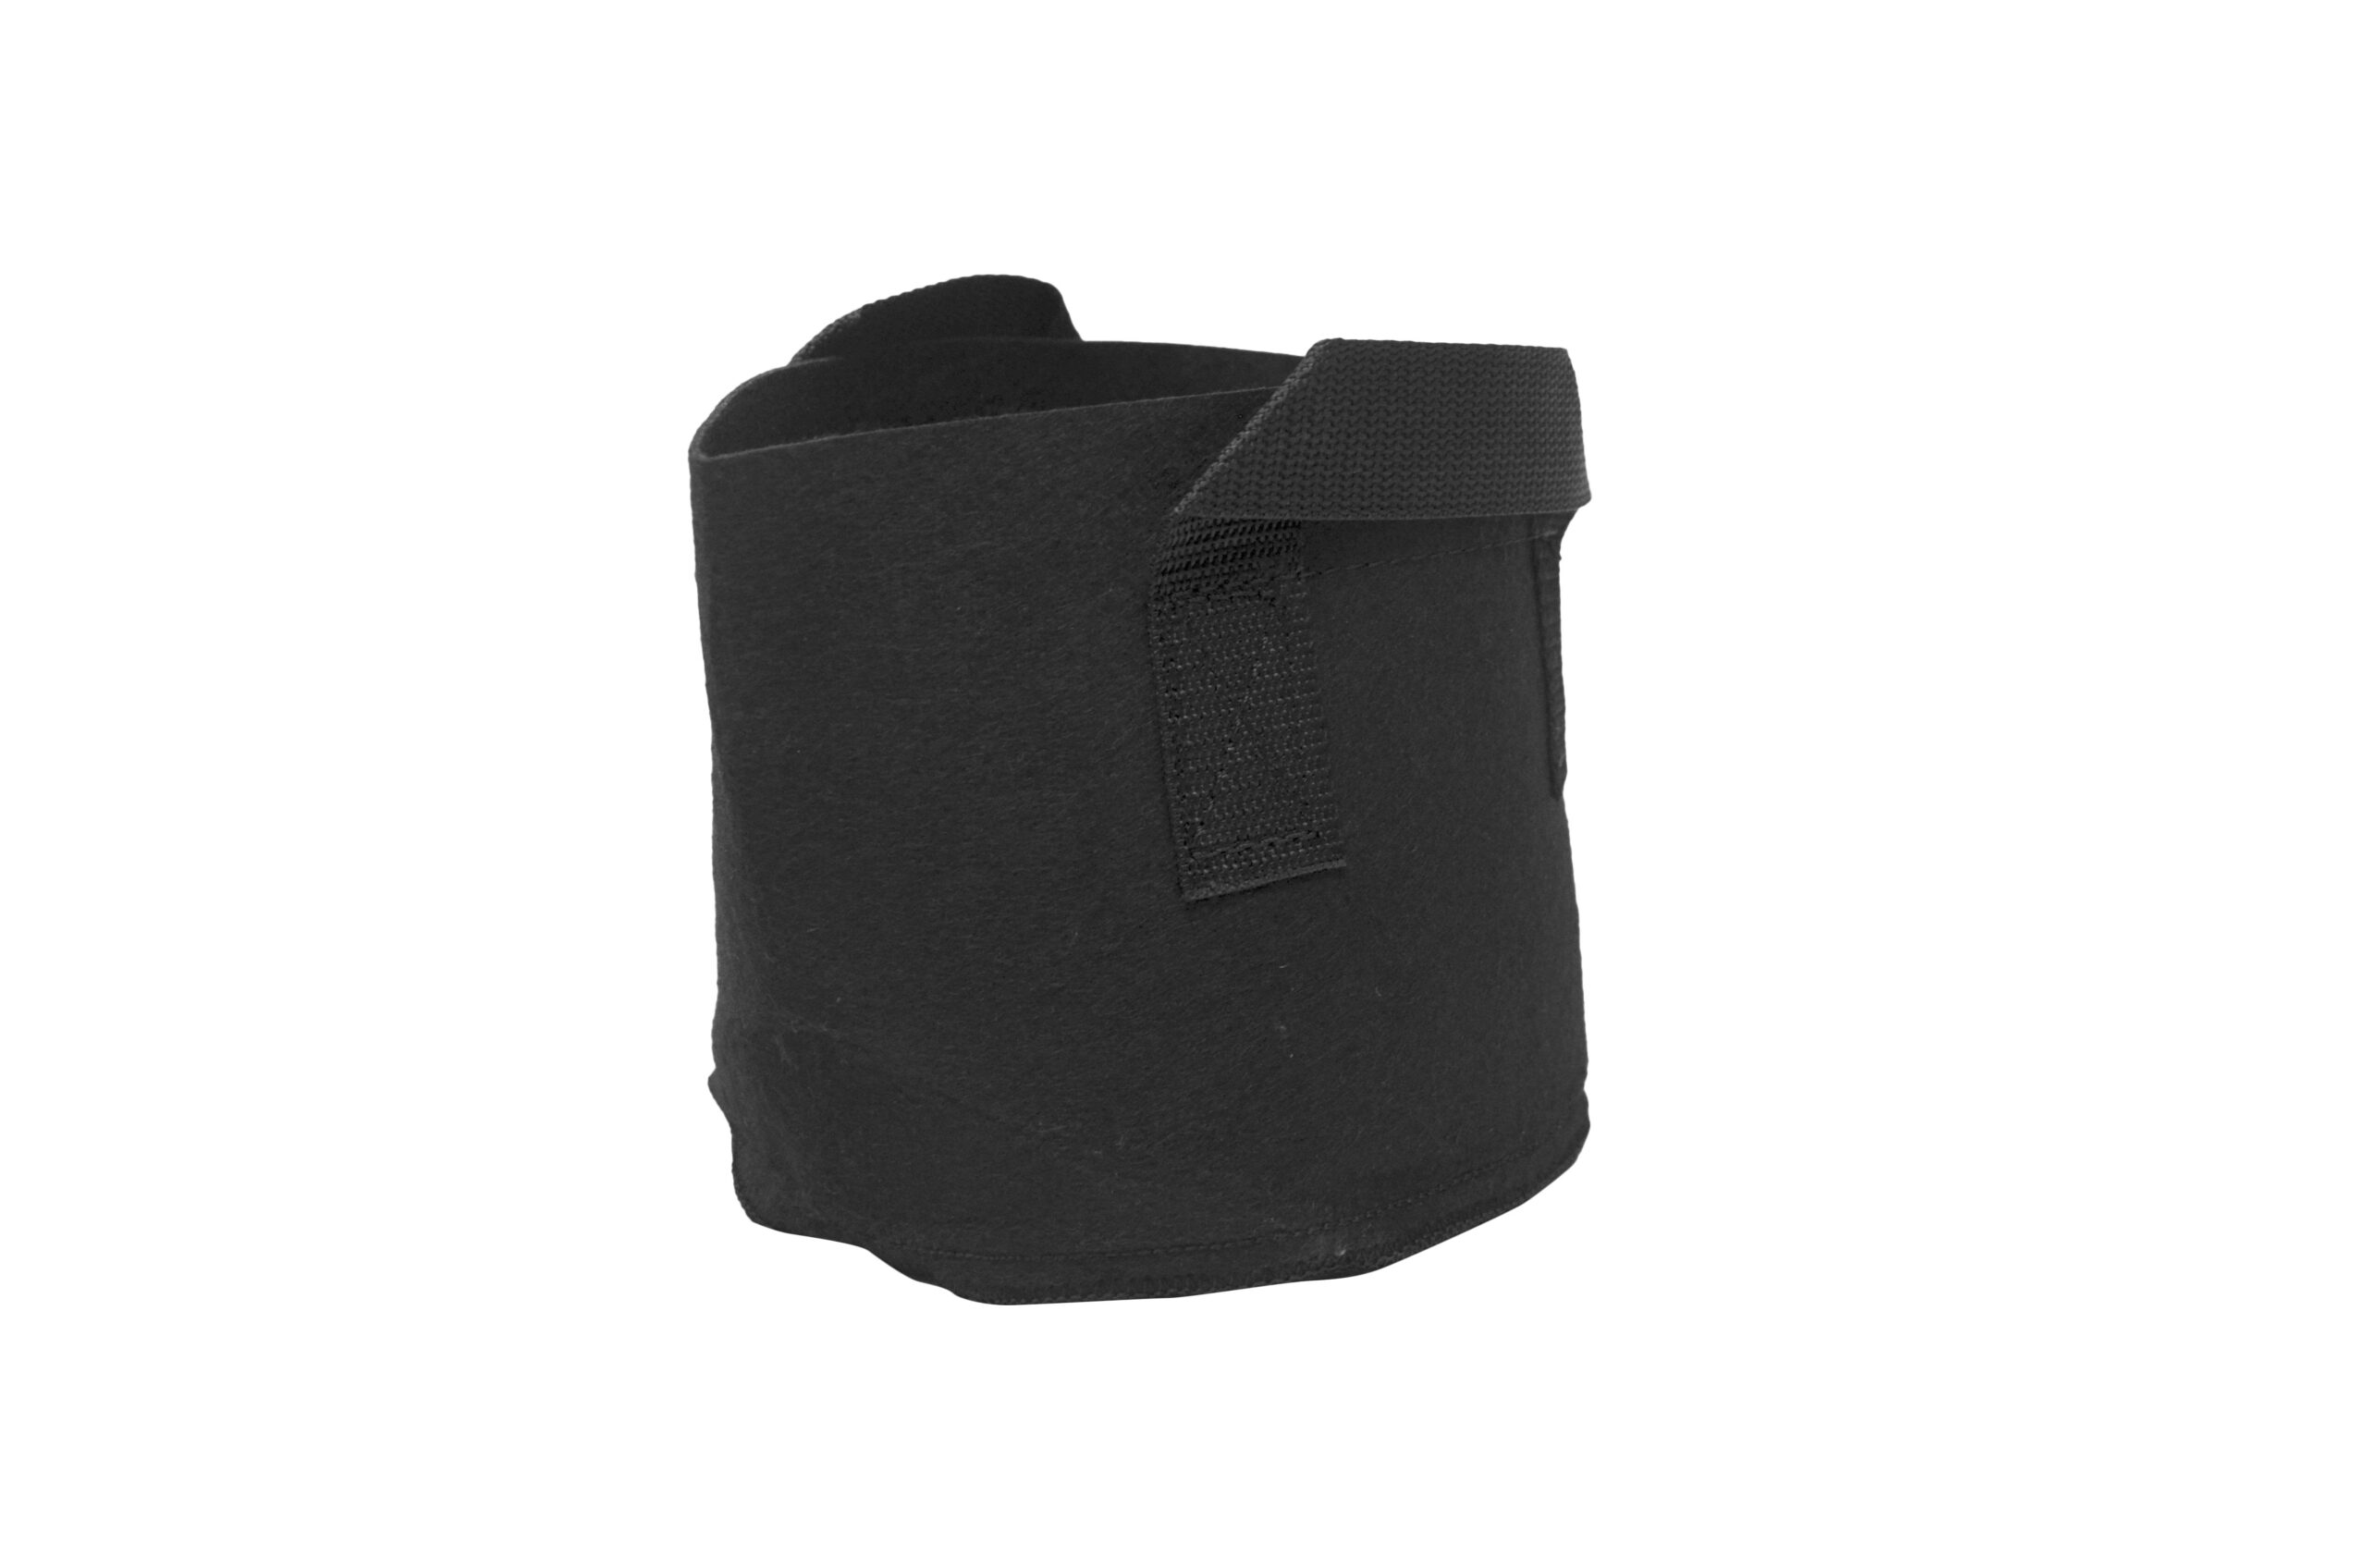 A black pouch with a zipper on it, perfect for carrying small items.